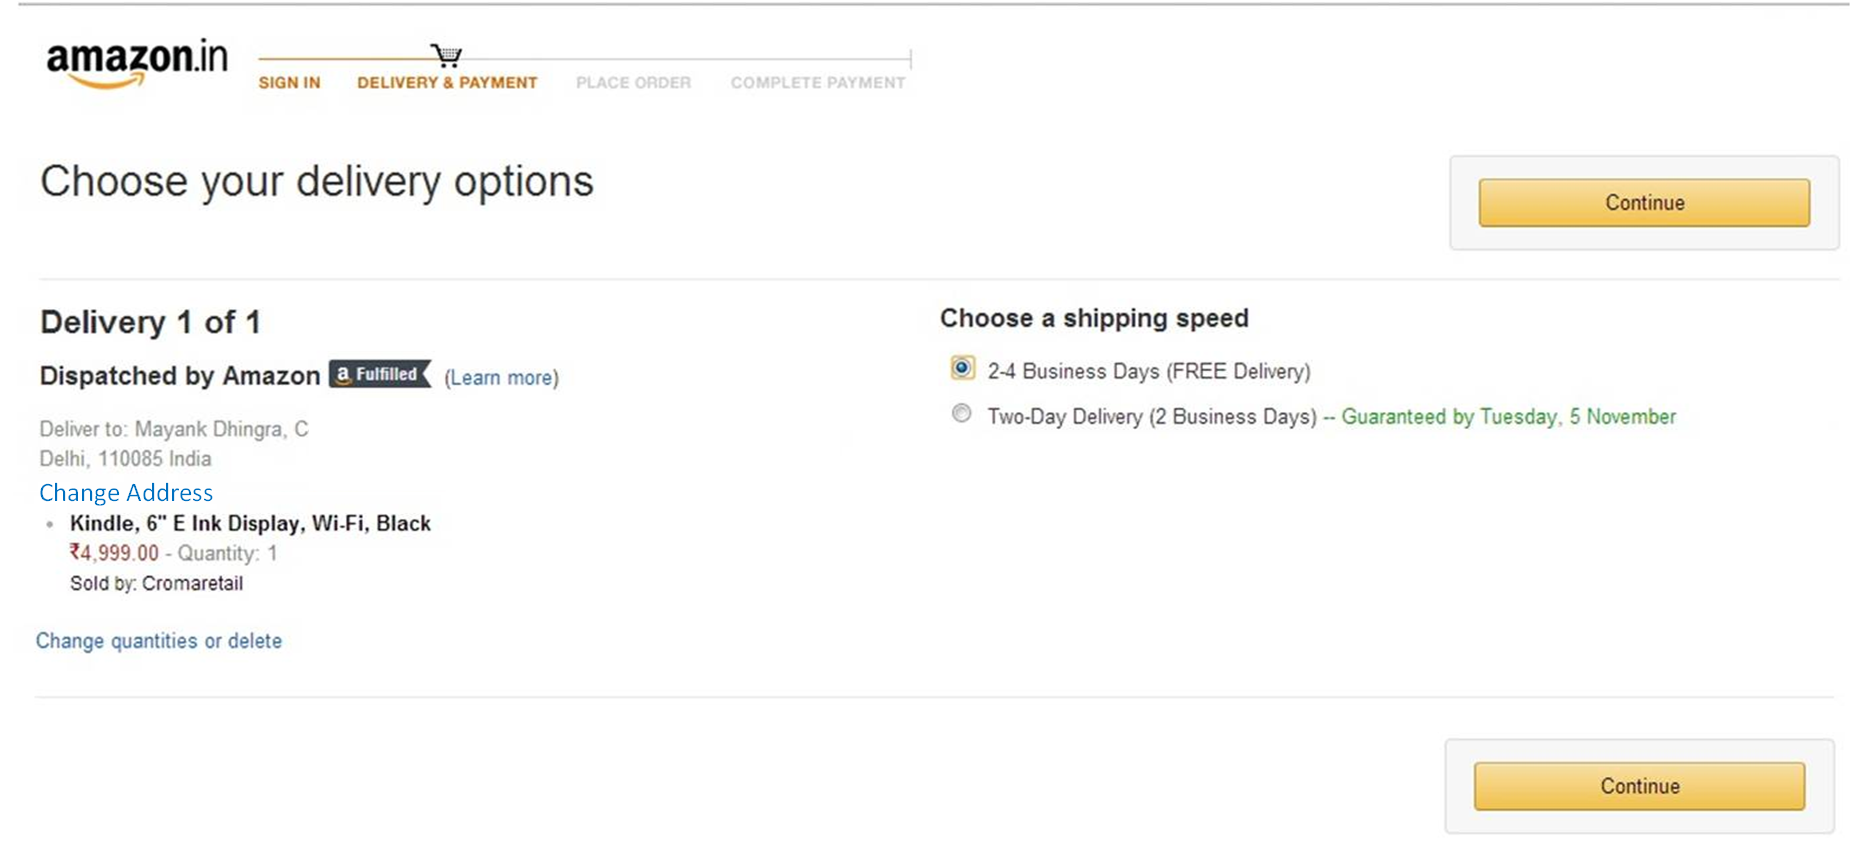 Delivery address and options page - Amazon.in